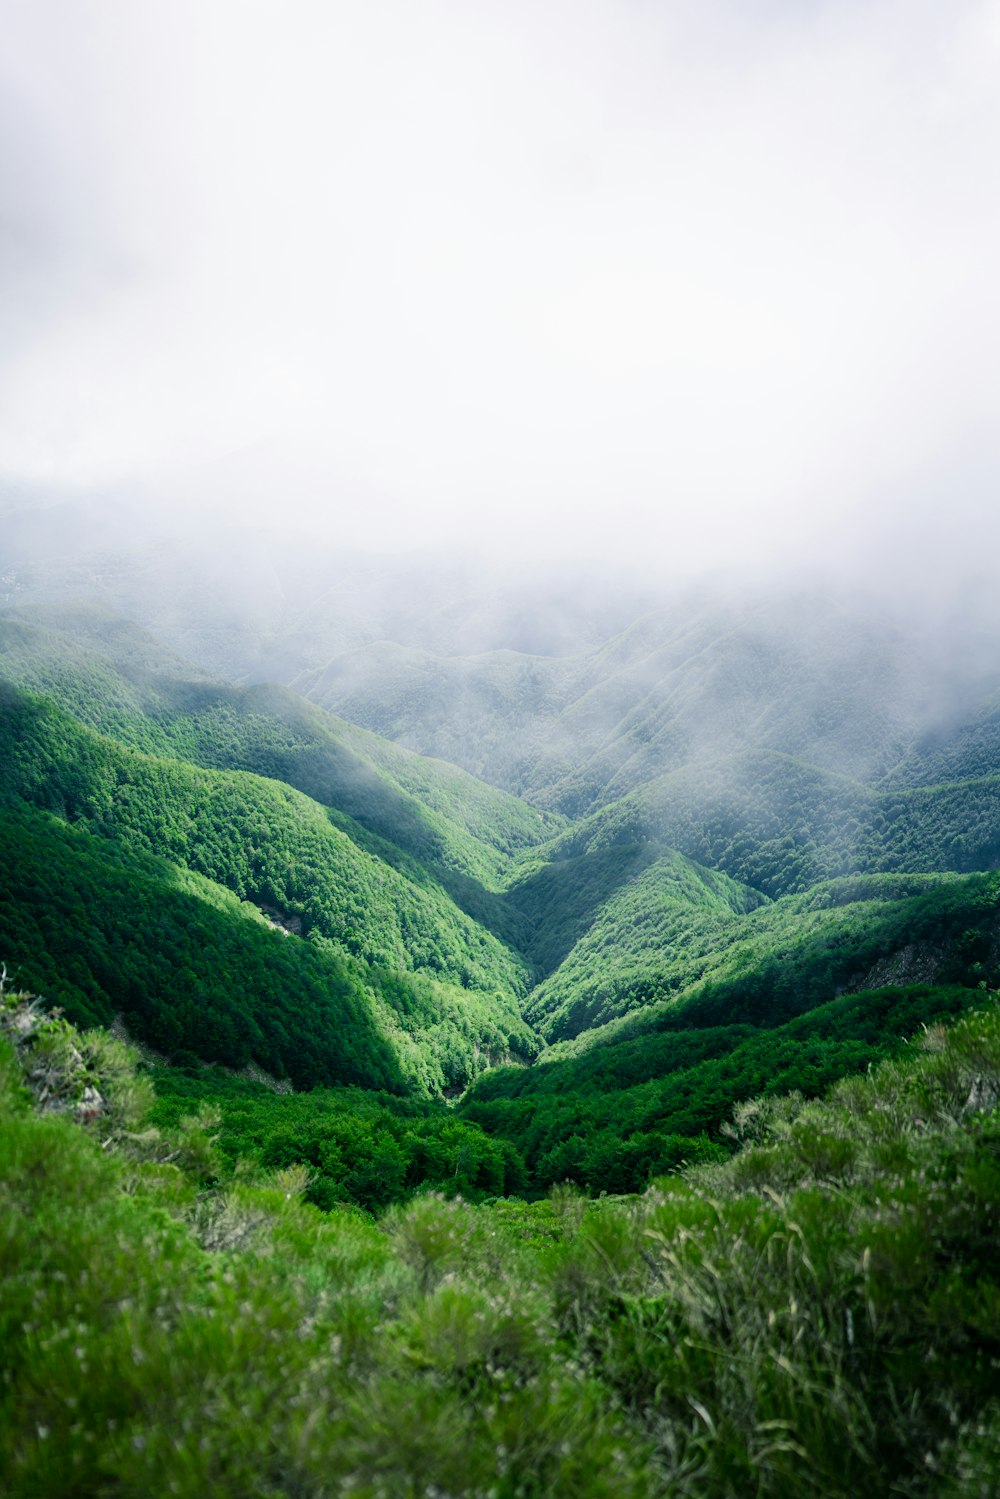 a view of a lush green valley in the mountains